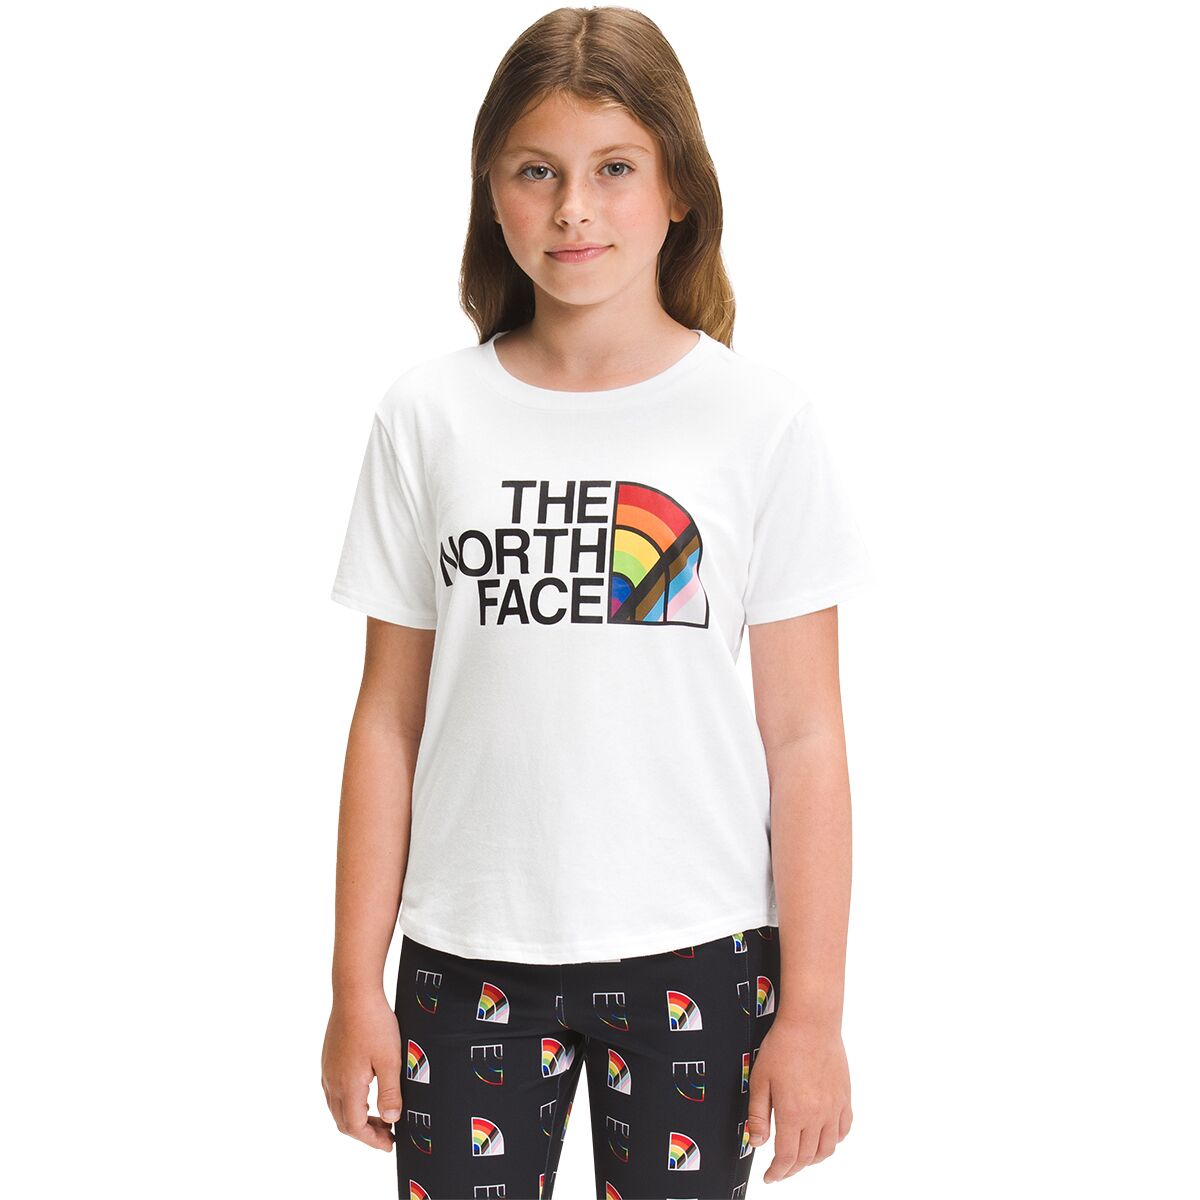 The North Face Printed Pride Graphic Short-Sleeve T-Shirt - Girls'